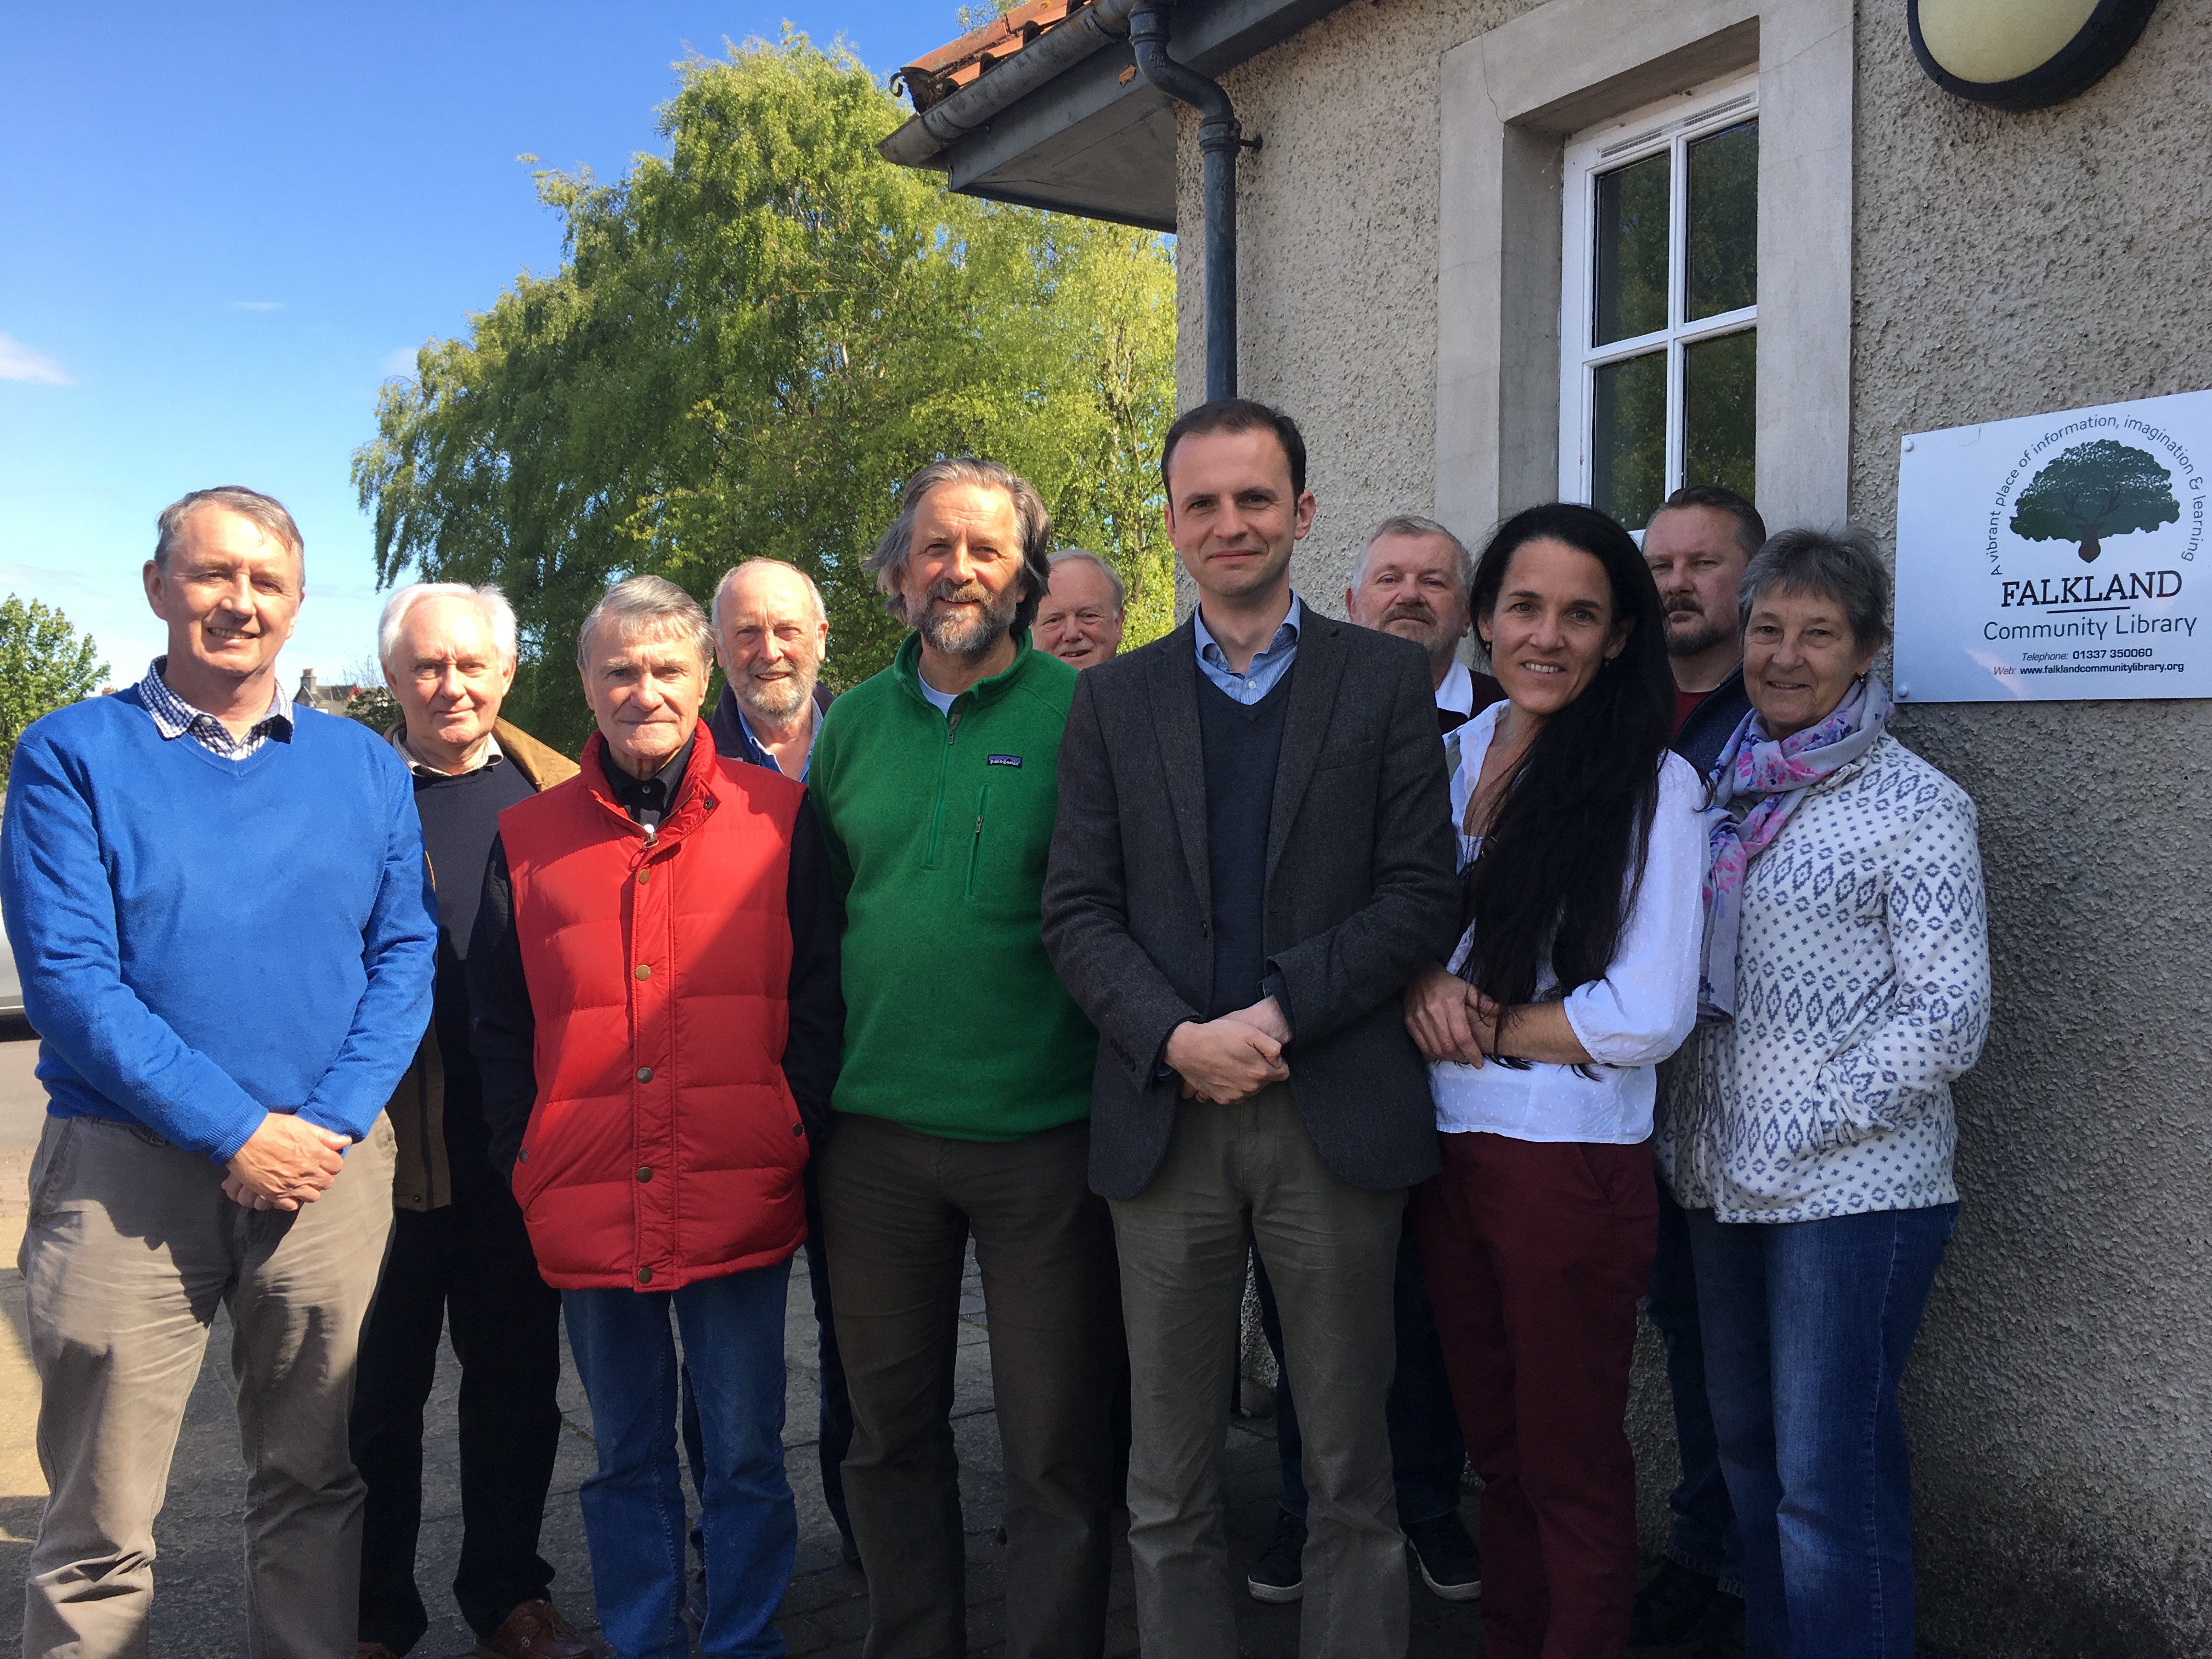 Stephen Gethins MP, fifth from right, is pictured with Falkland residents and Springfield Homes’ land and planning manager Jim Ravey, left.